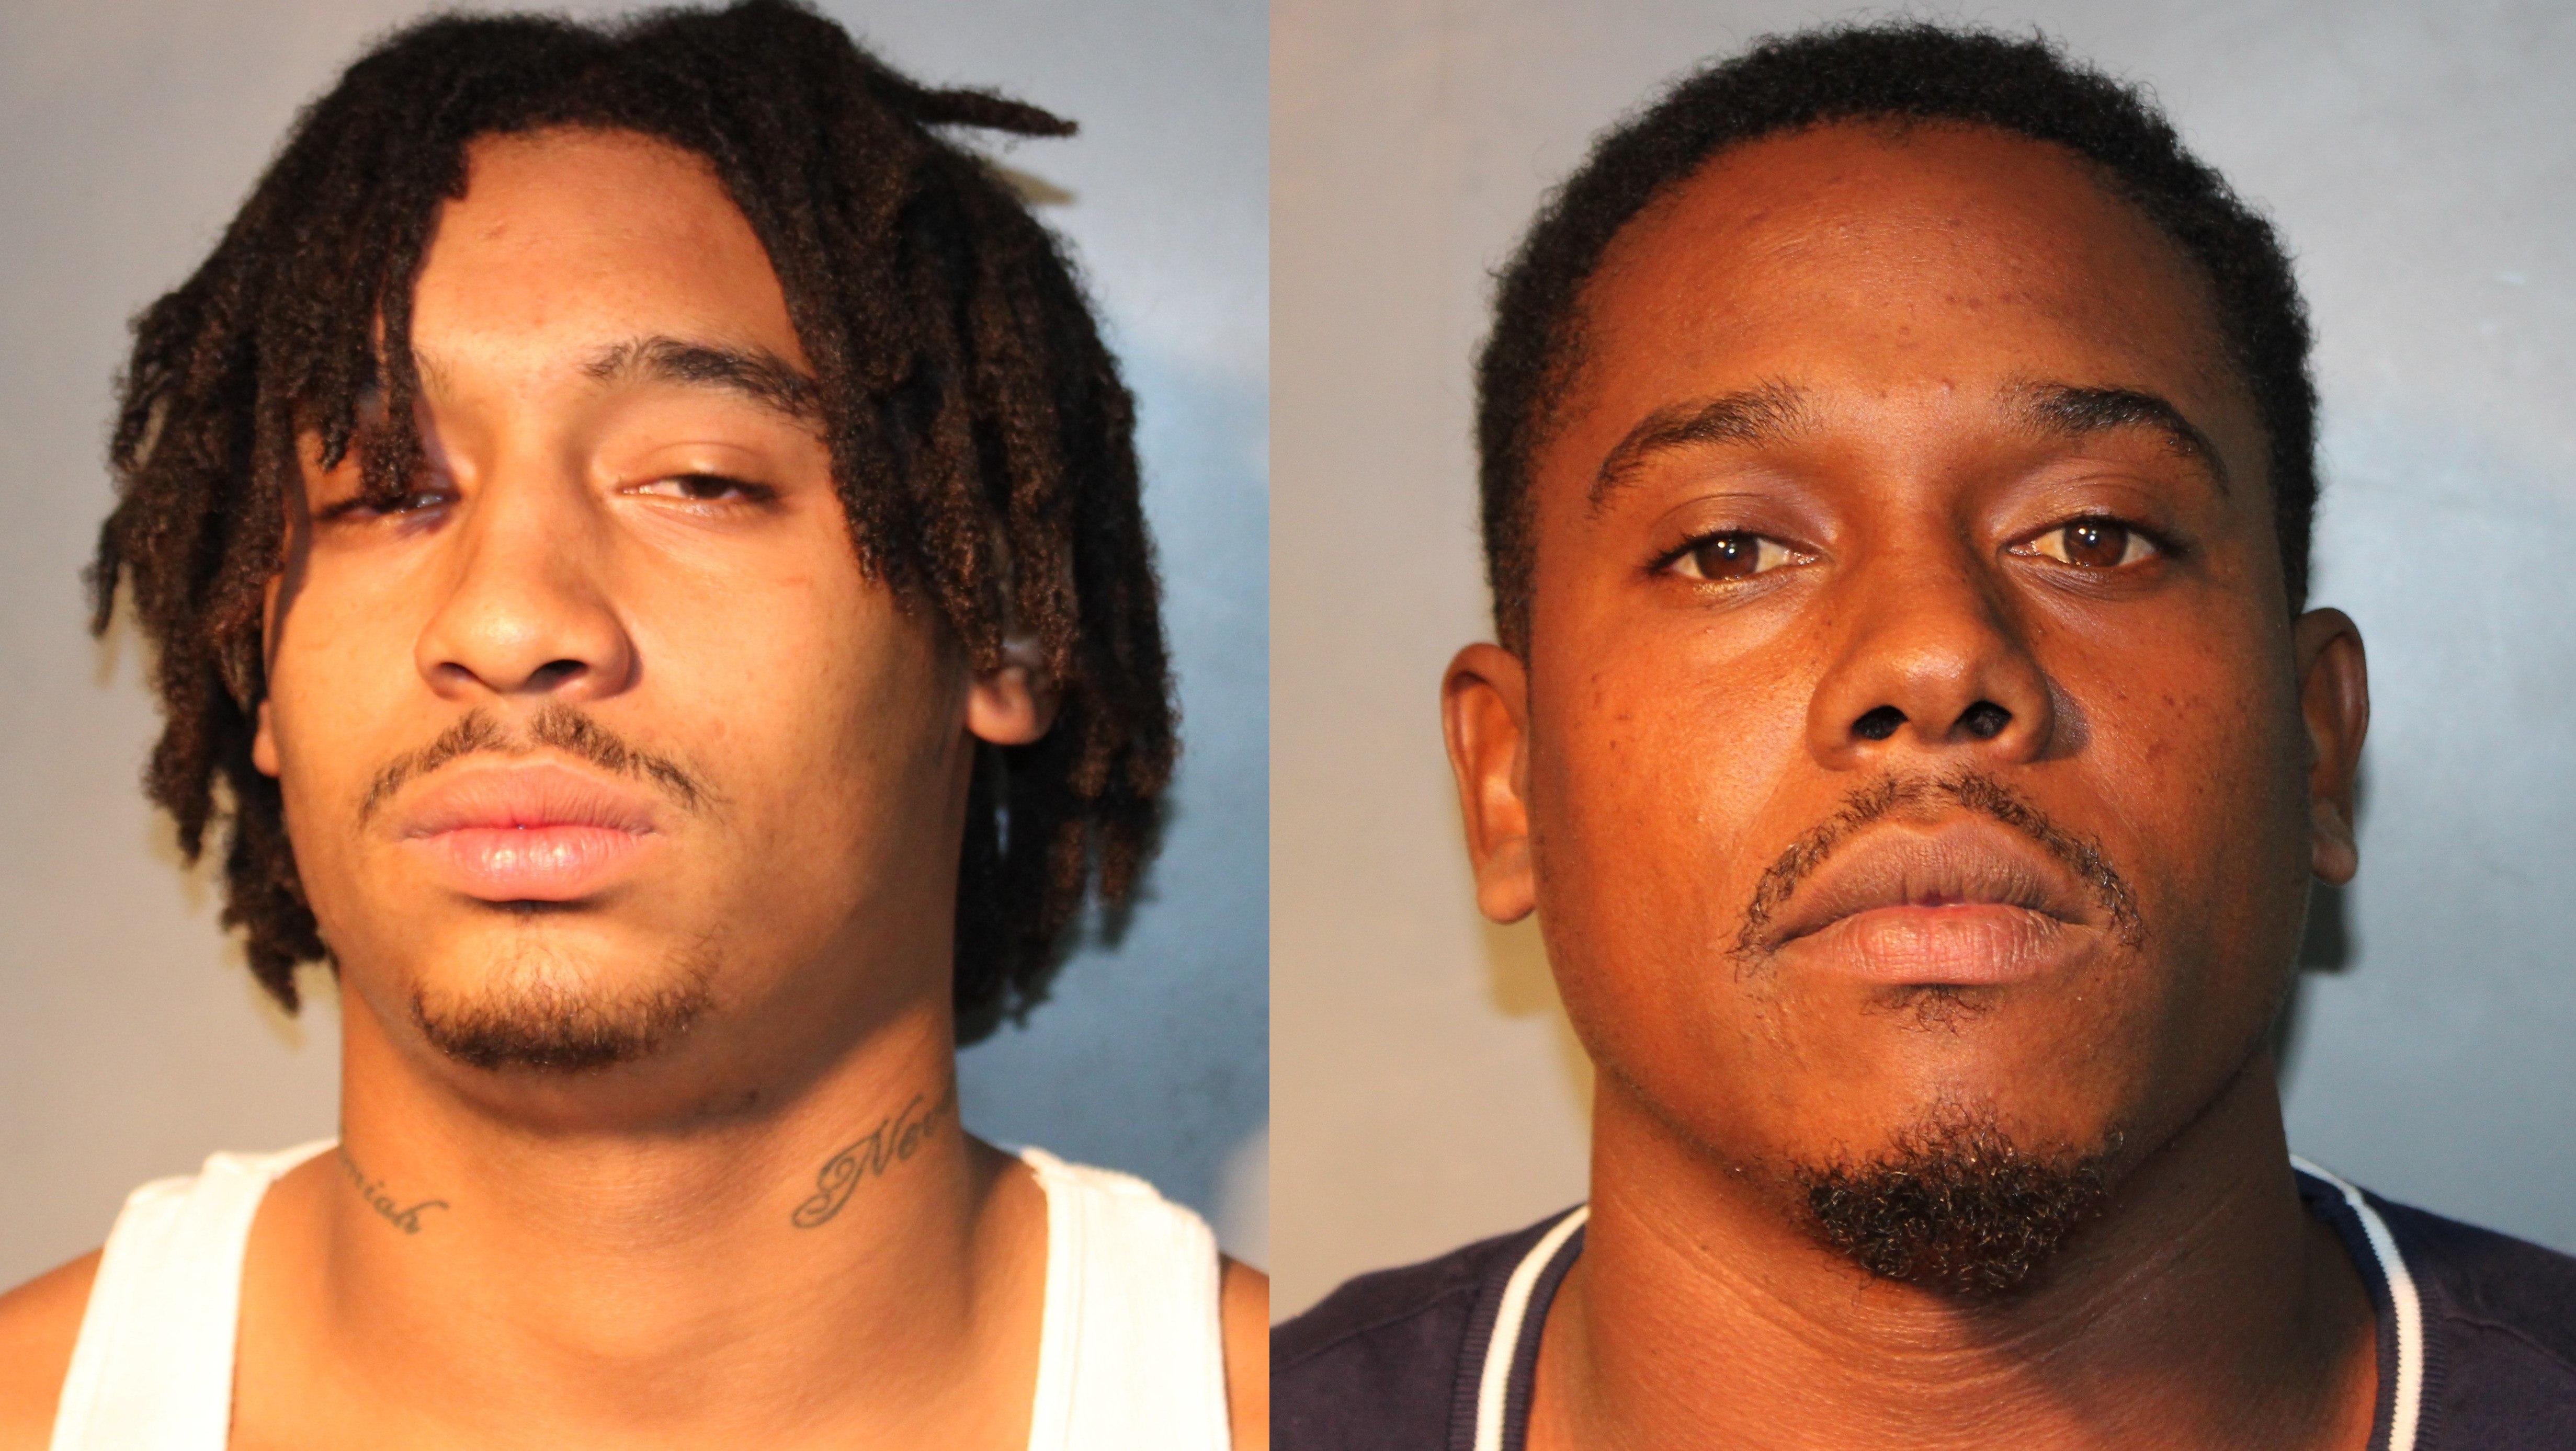 VIPD: Routine Traffic Stop Yields Cache of Guns And Drugs ... Two St. Croix Men Arrested